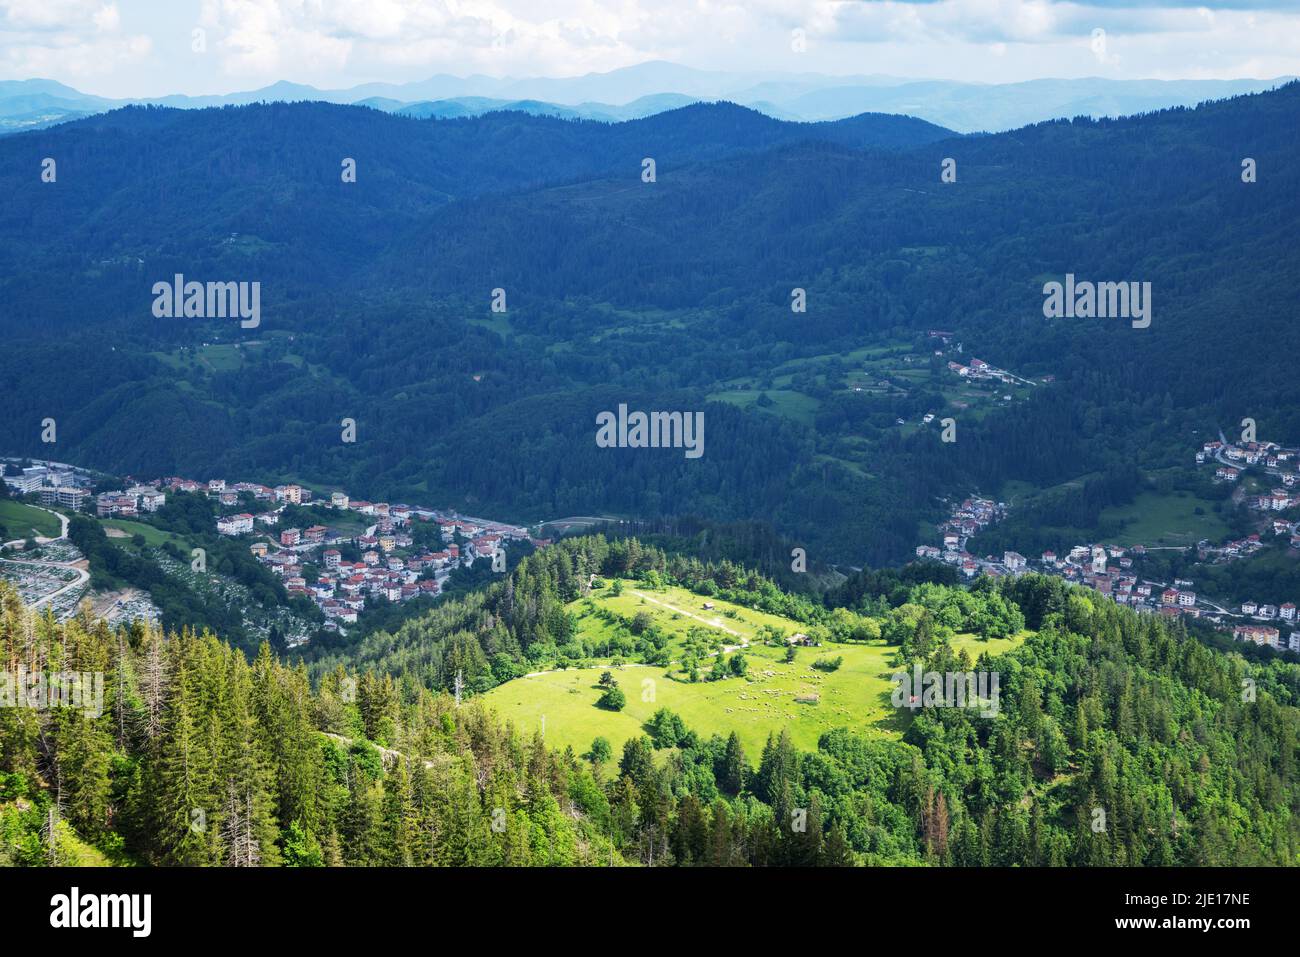 Green spring mountain valley sheltered by mountain vegetation and spruce dark dense forests with small old cattle village of Smolyan, with bright gras Stock Photo